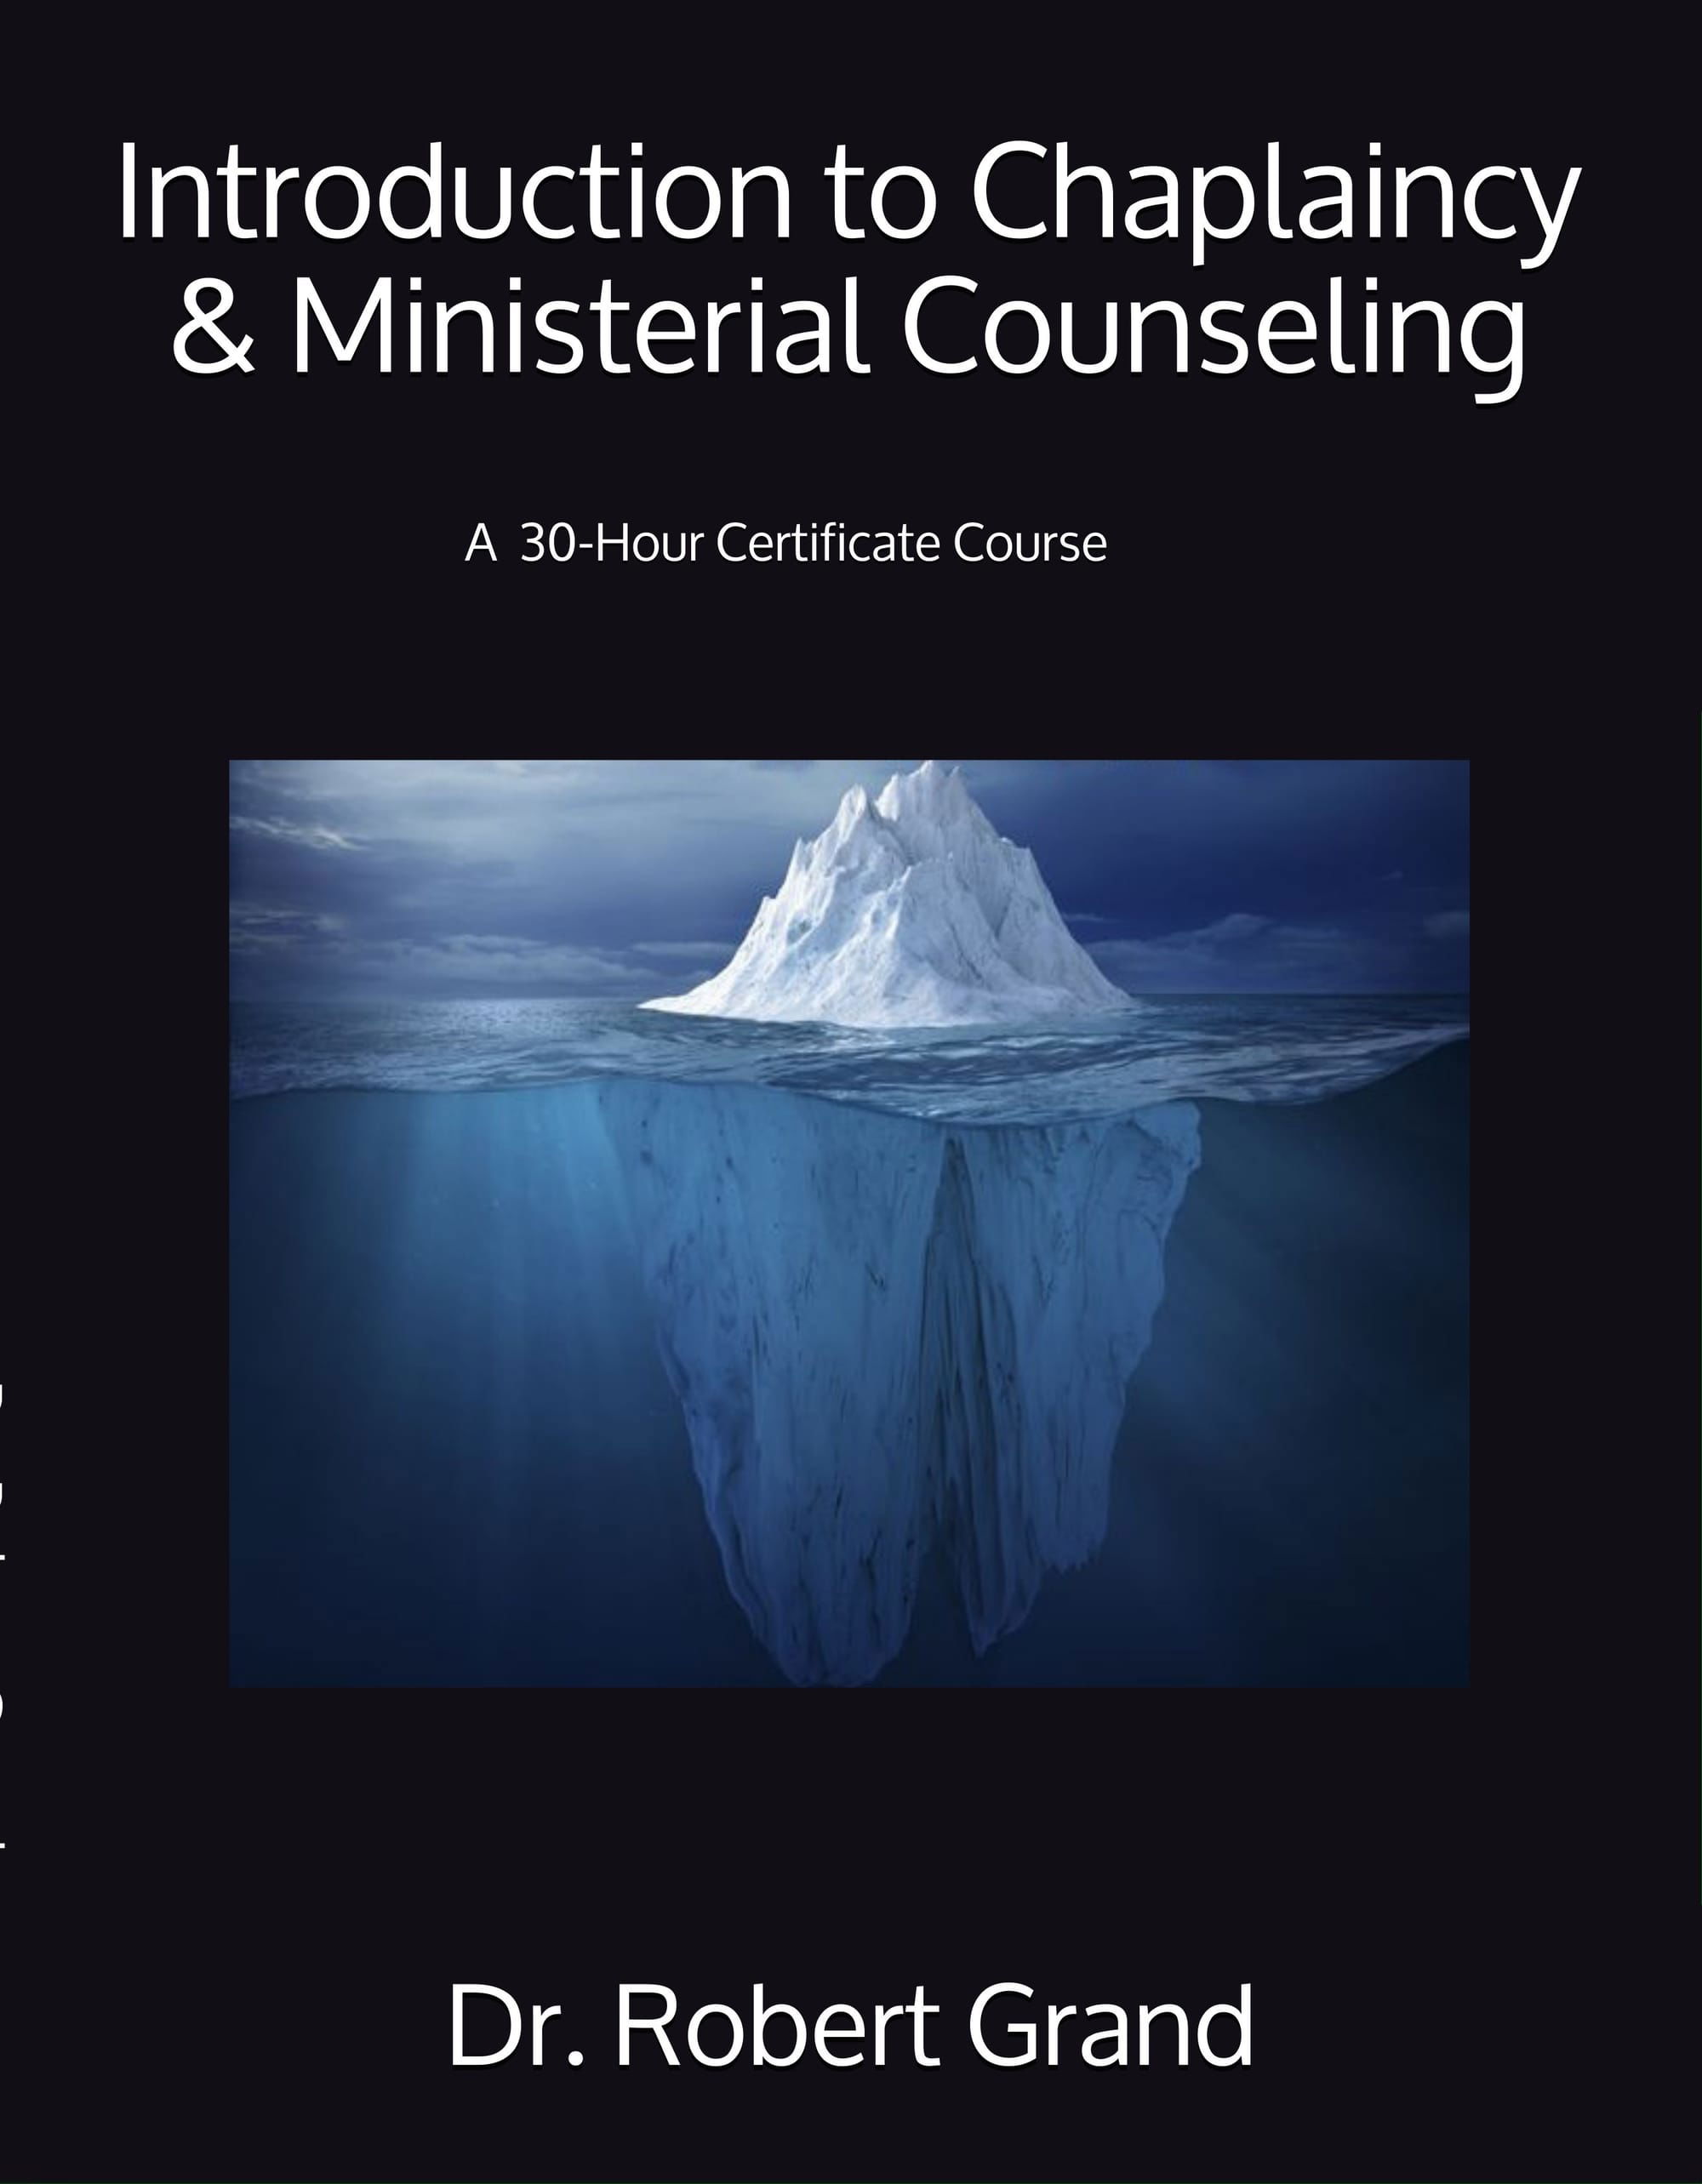 Introduction to Chaplaincy & Ministerial Counseling